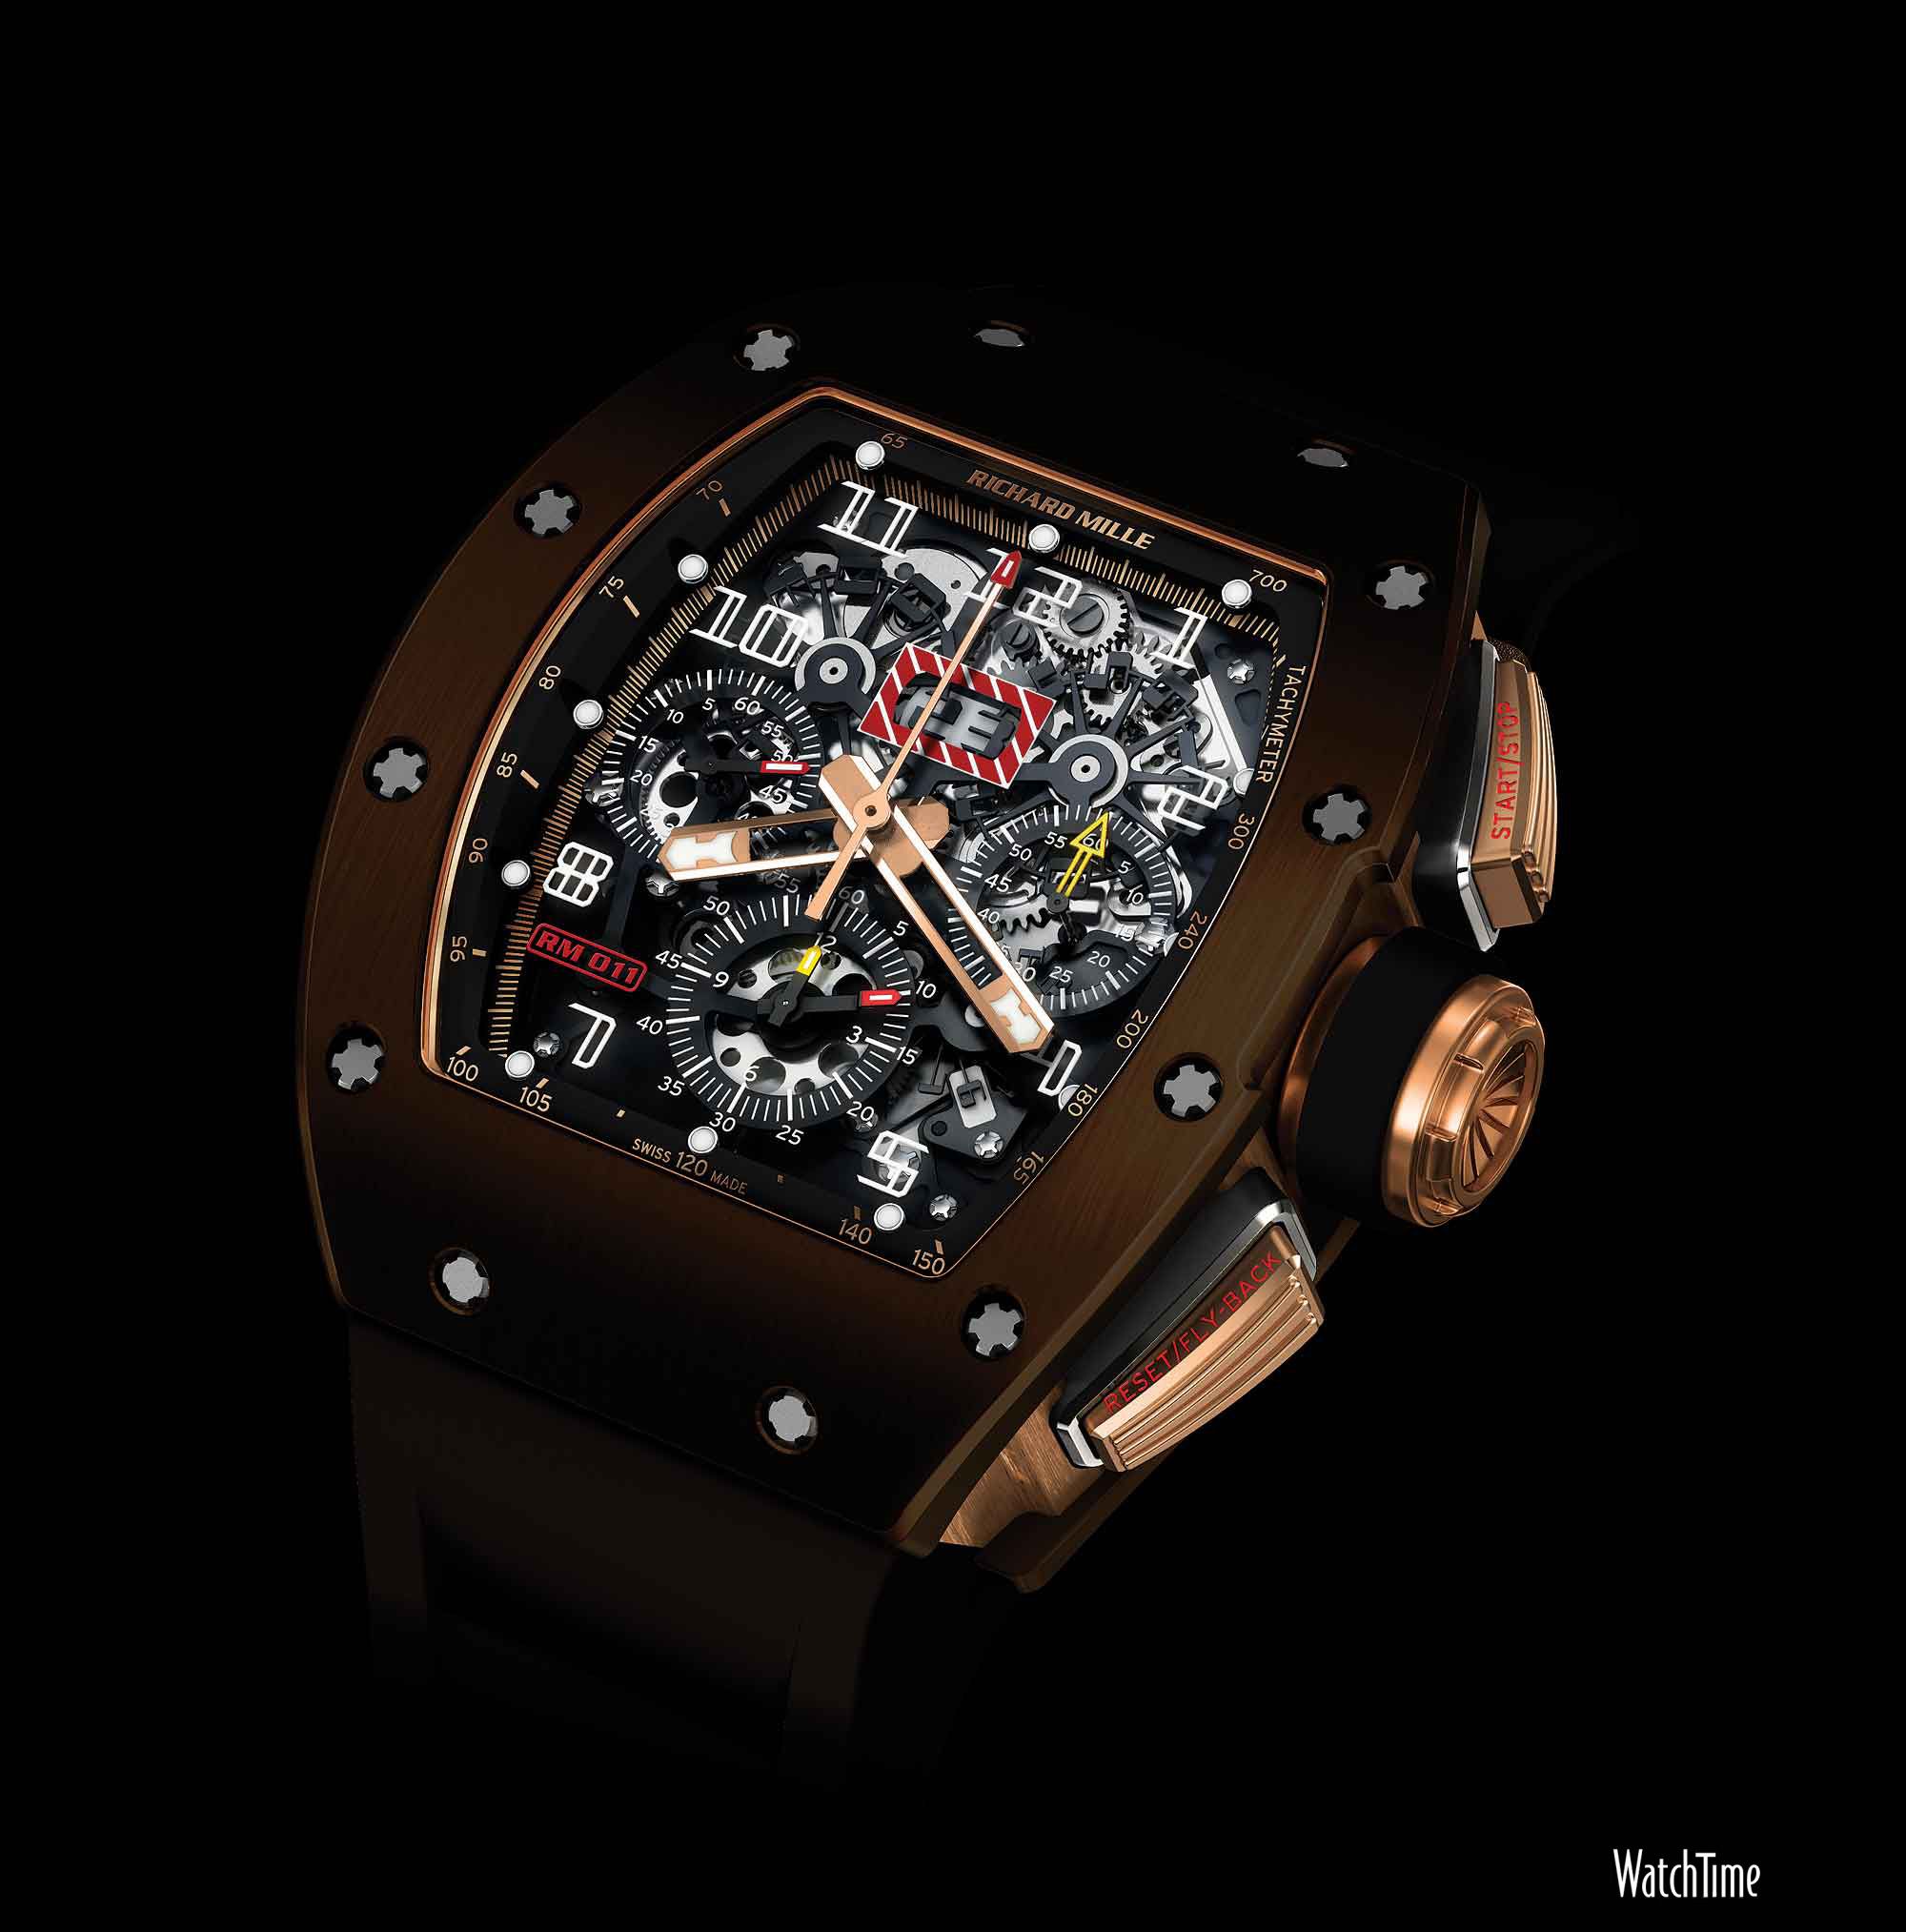 Richard Mille's New RM 011 Brings Another F1 Material to